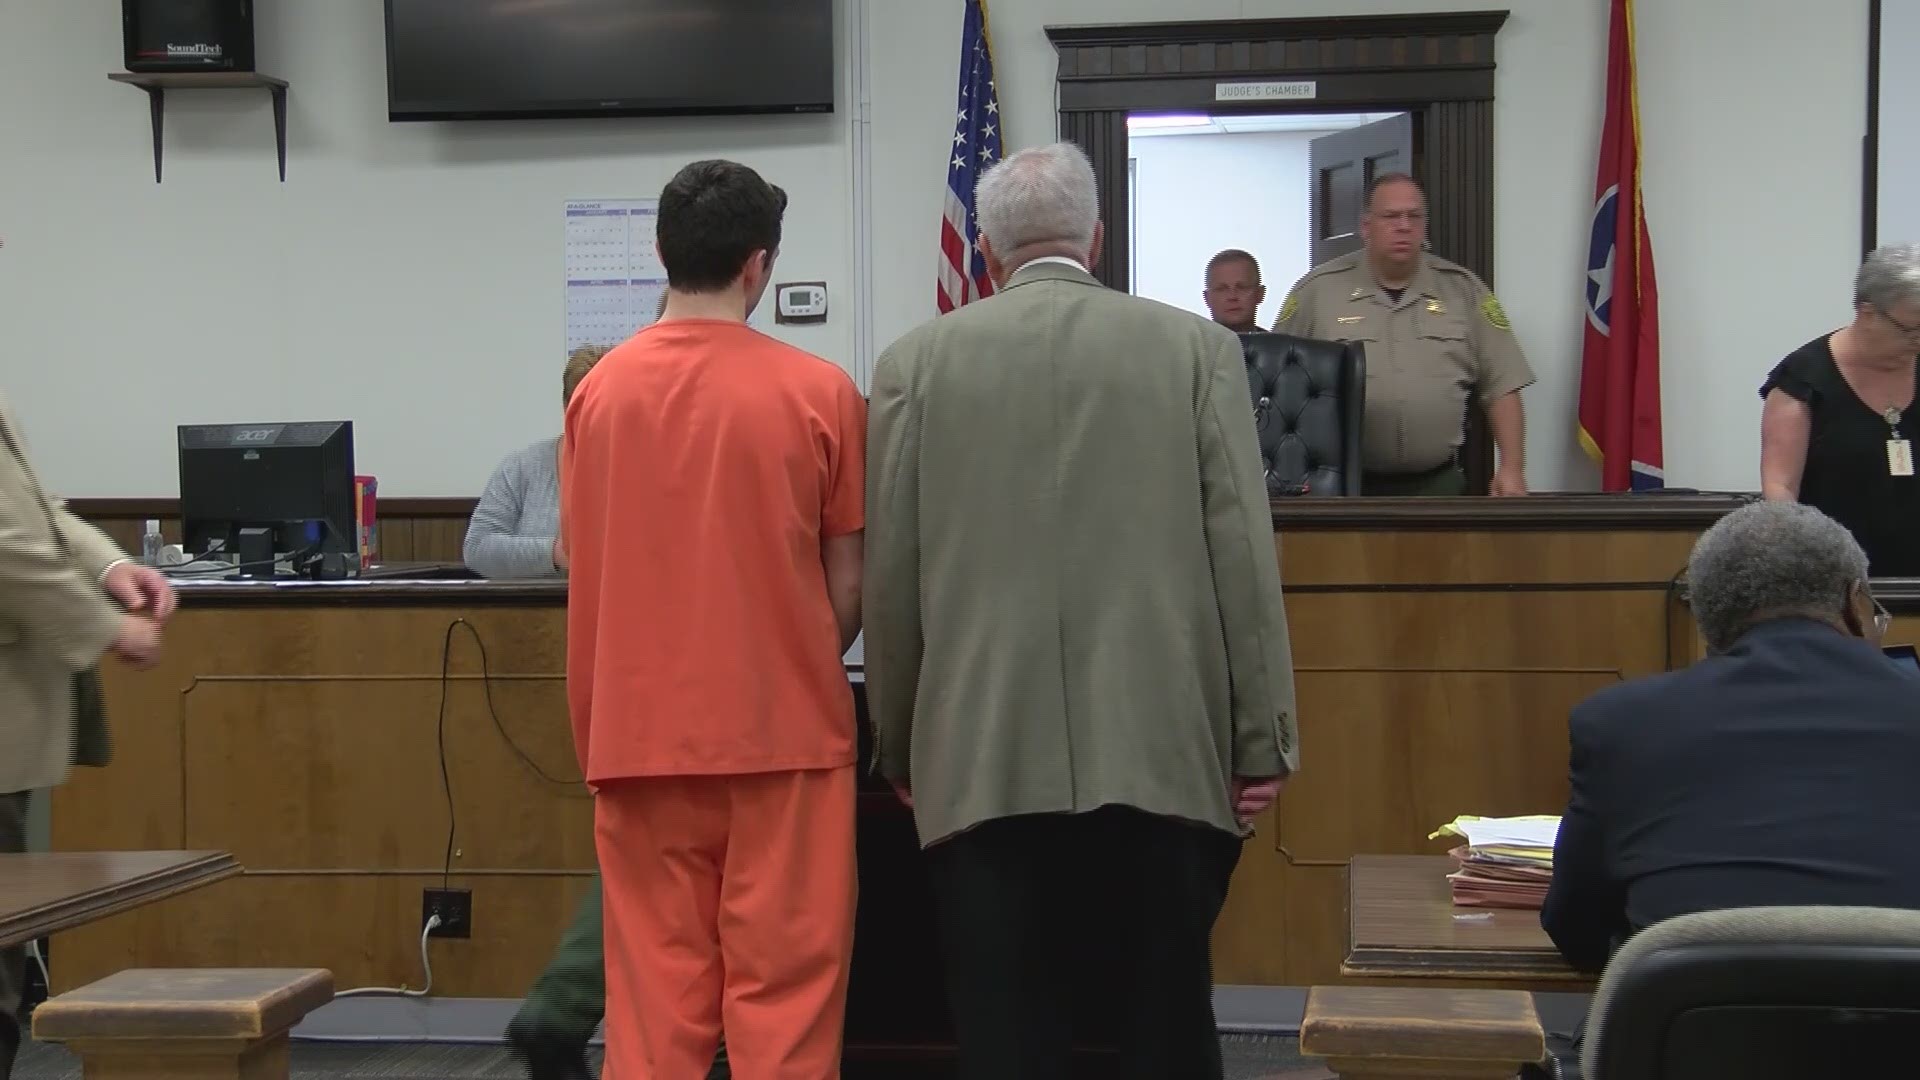 Zachary Thomas Blanchard, was accused of fatally shooting his dad then taking off to South Carolina with several of his friends in 2014. (Video: WCYB 9/26/16)